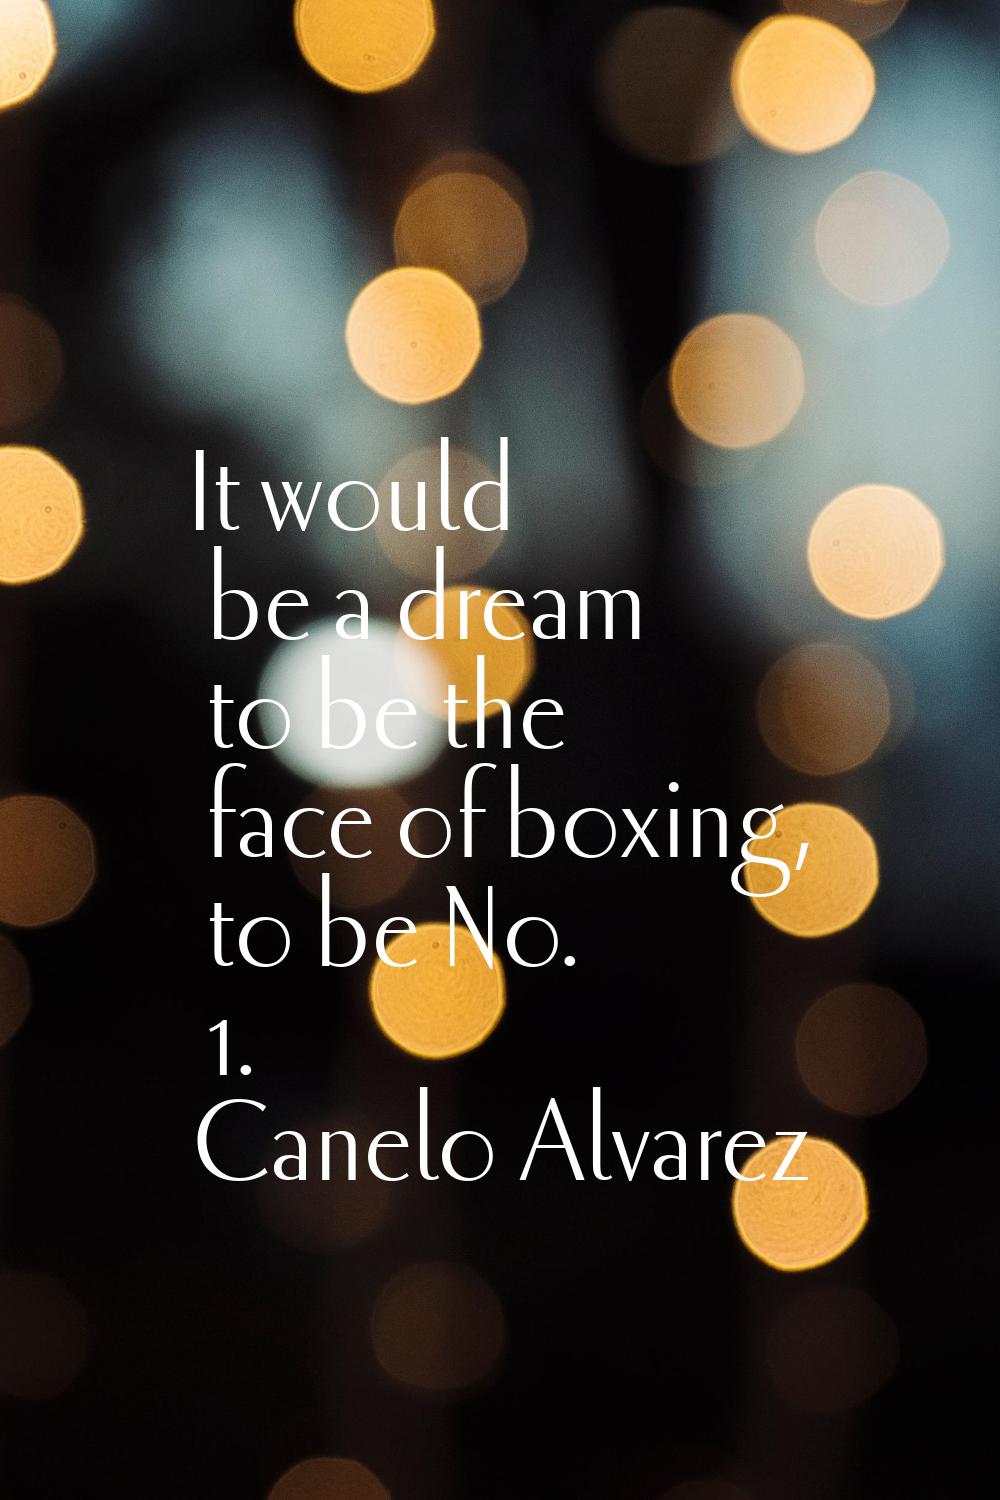 It would be a dream to be the face of boxing, to be No. 1.